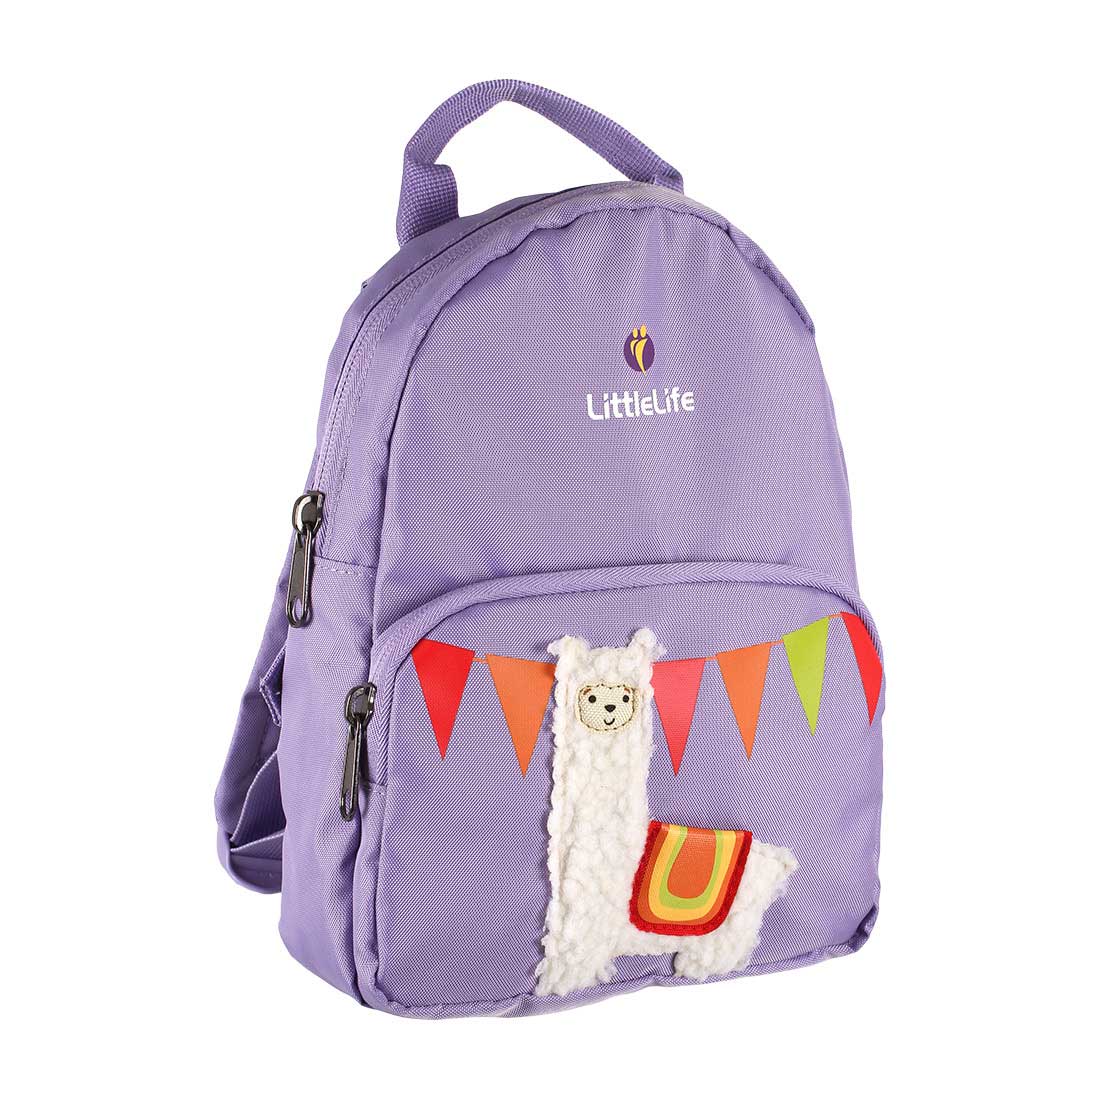 Llama Toddler Backpack with Rein